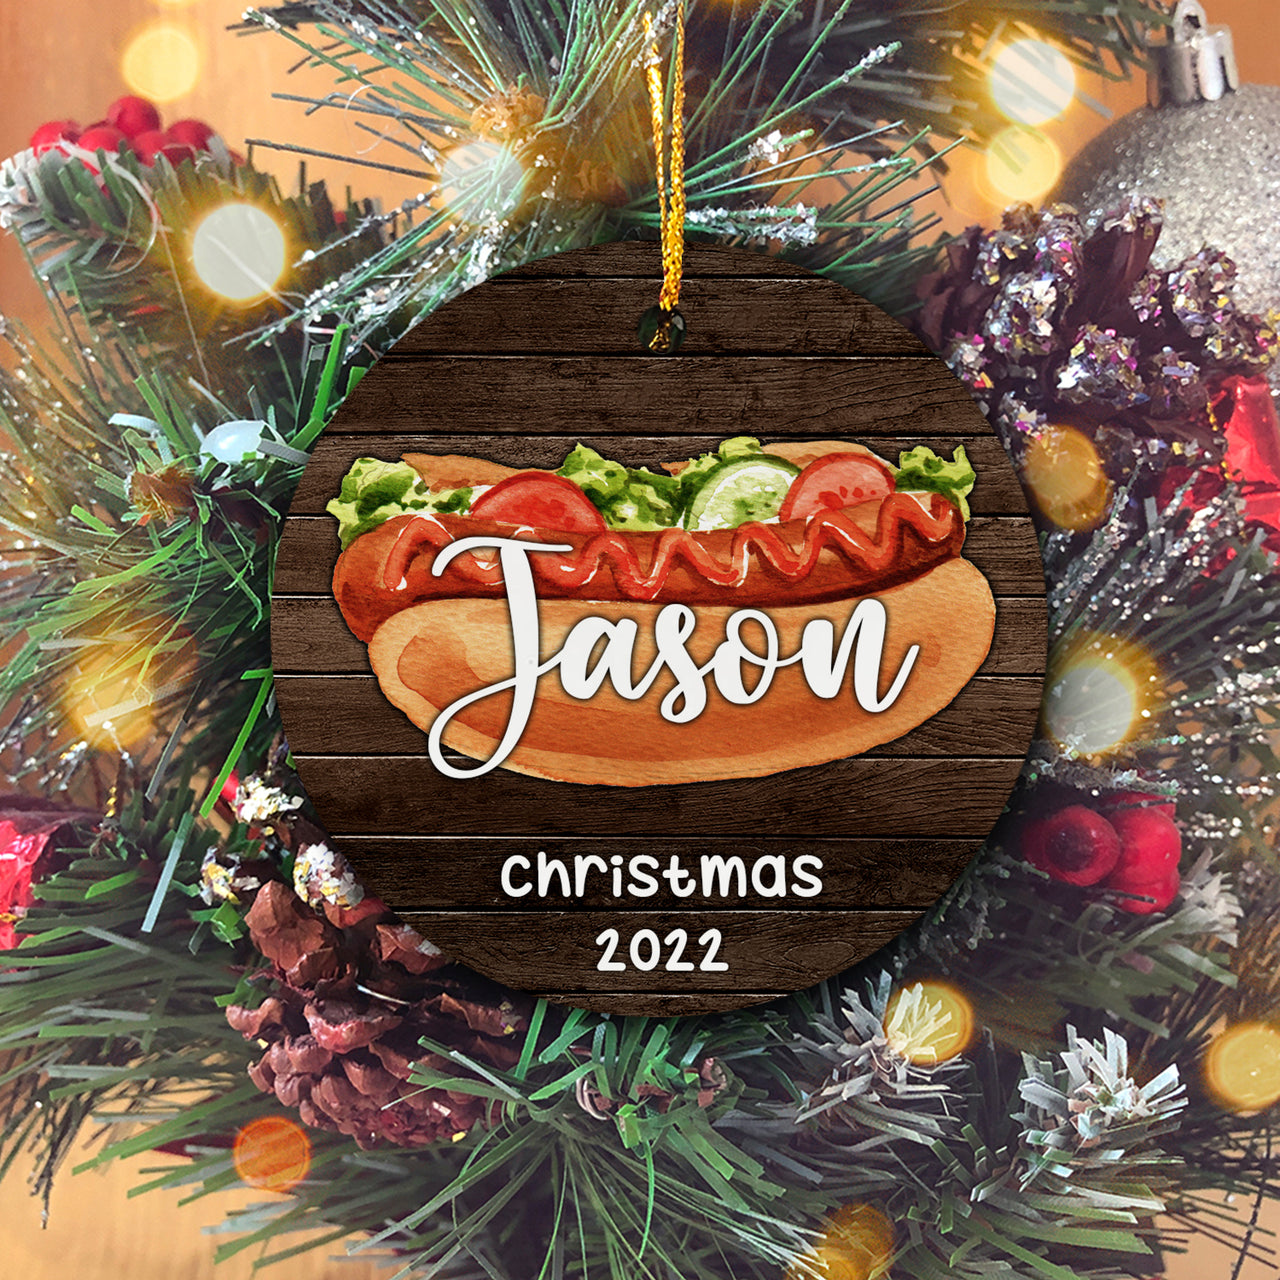 Hot Dog Personalized Christmas Premium Ceramic Ornaments Sets for Christmas Tree